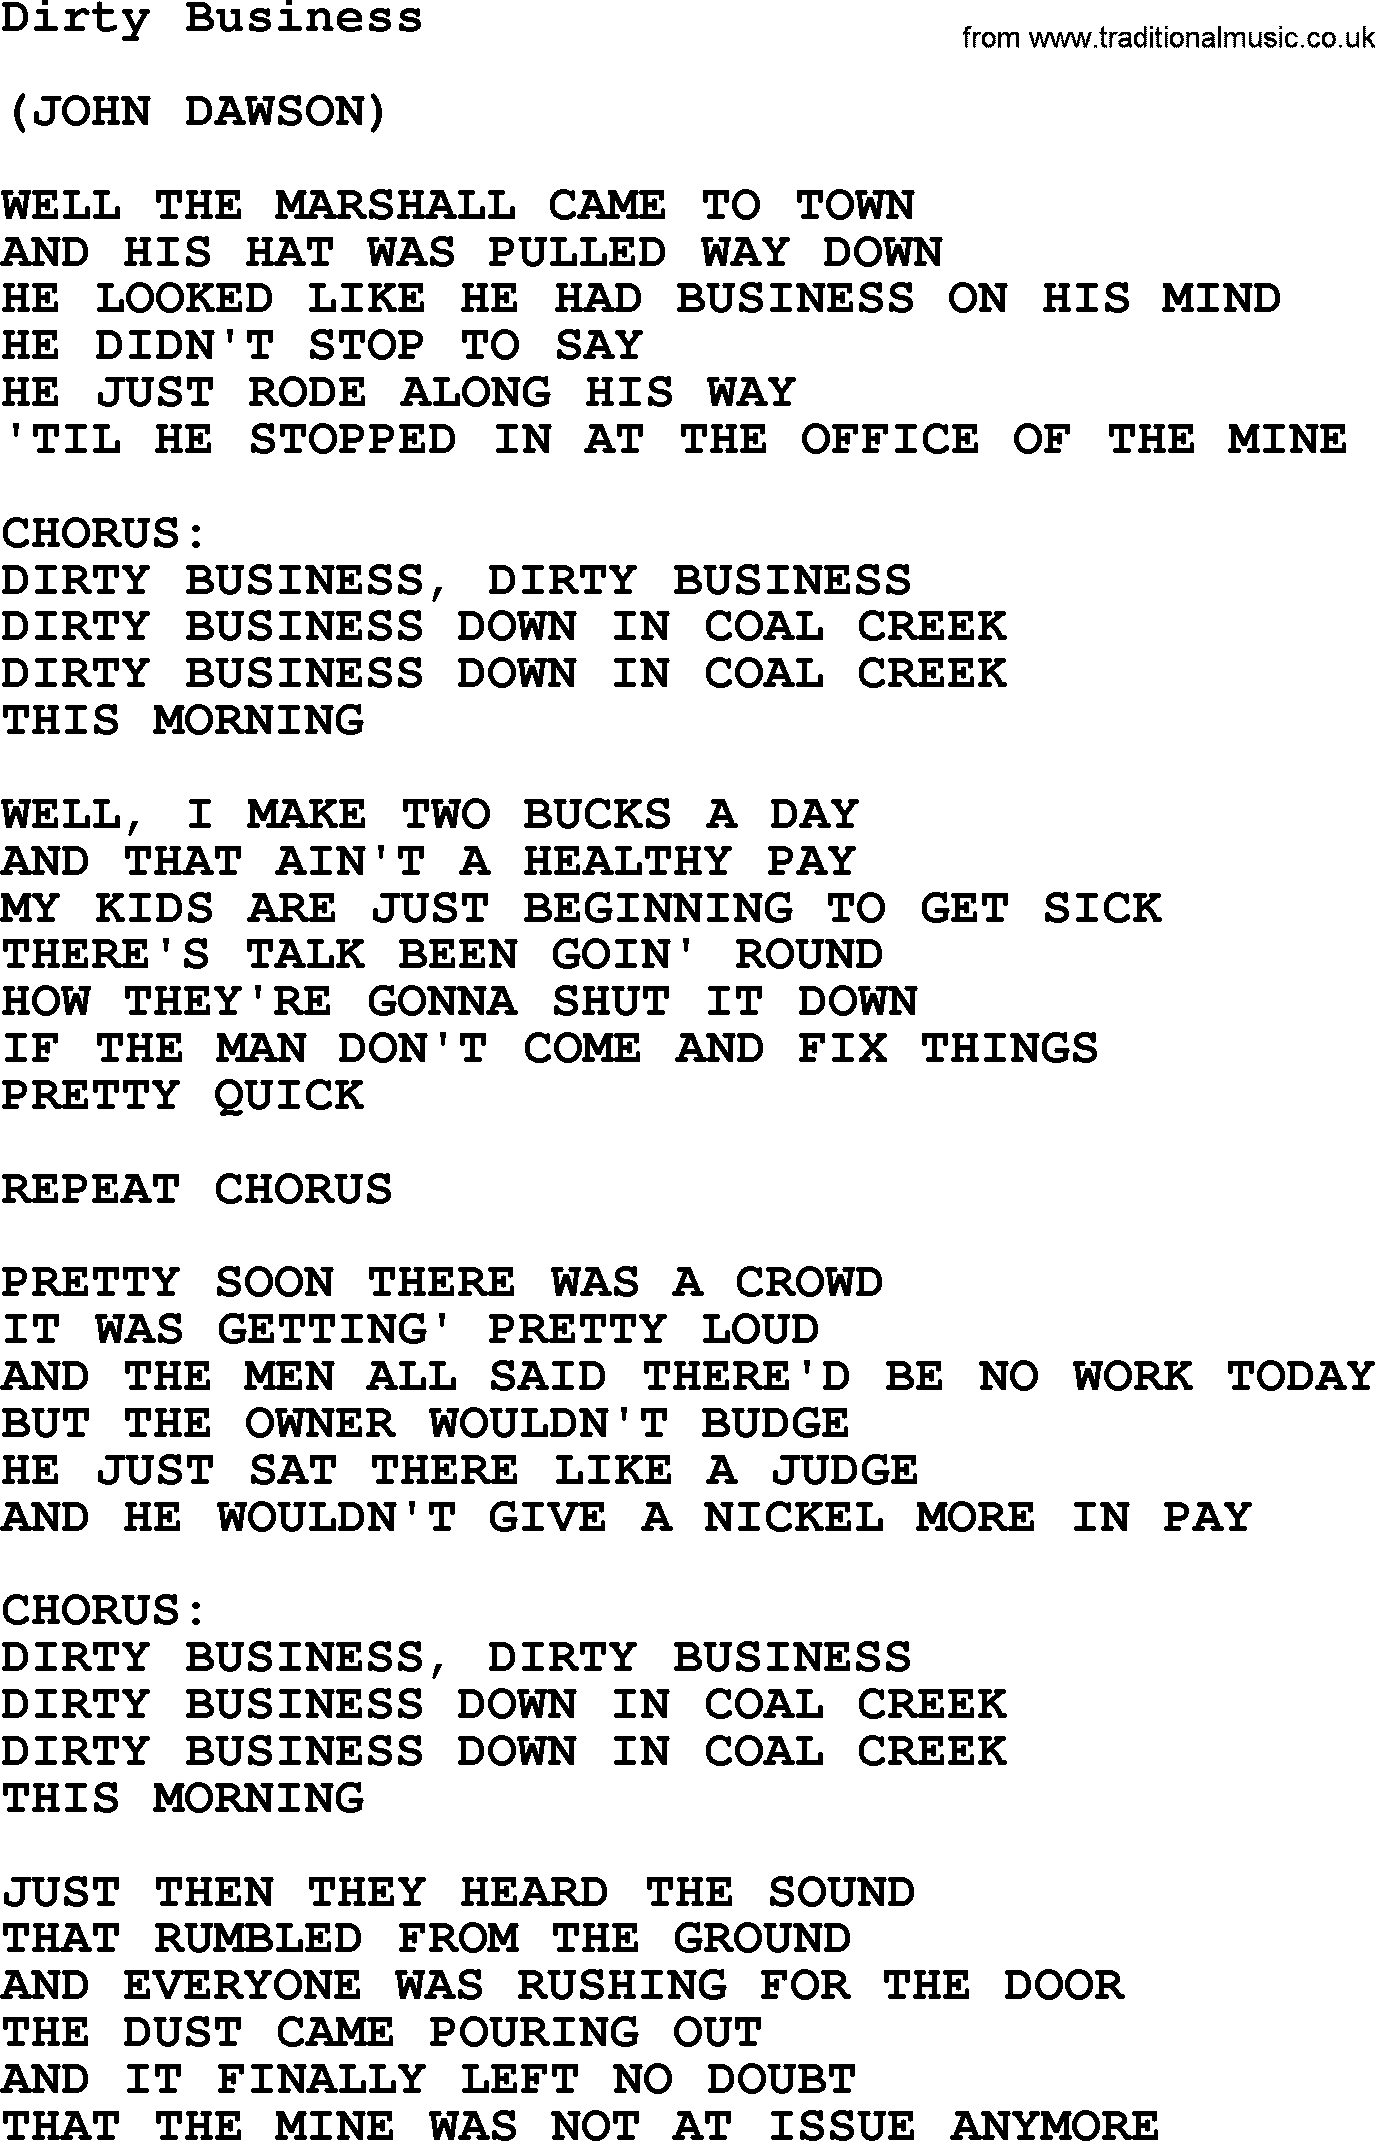 The Byrds song Dirty Business, lyrics